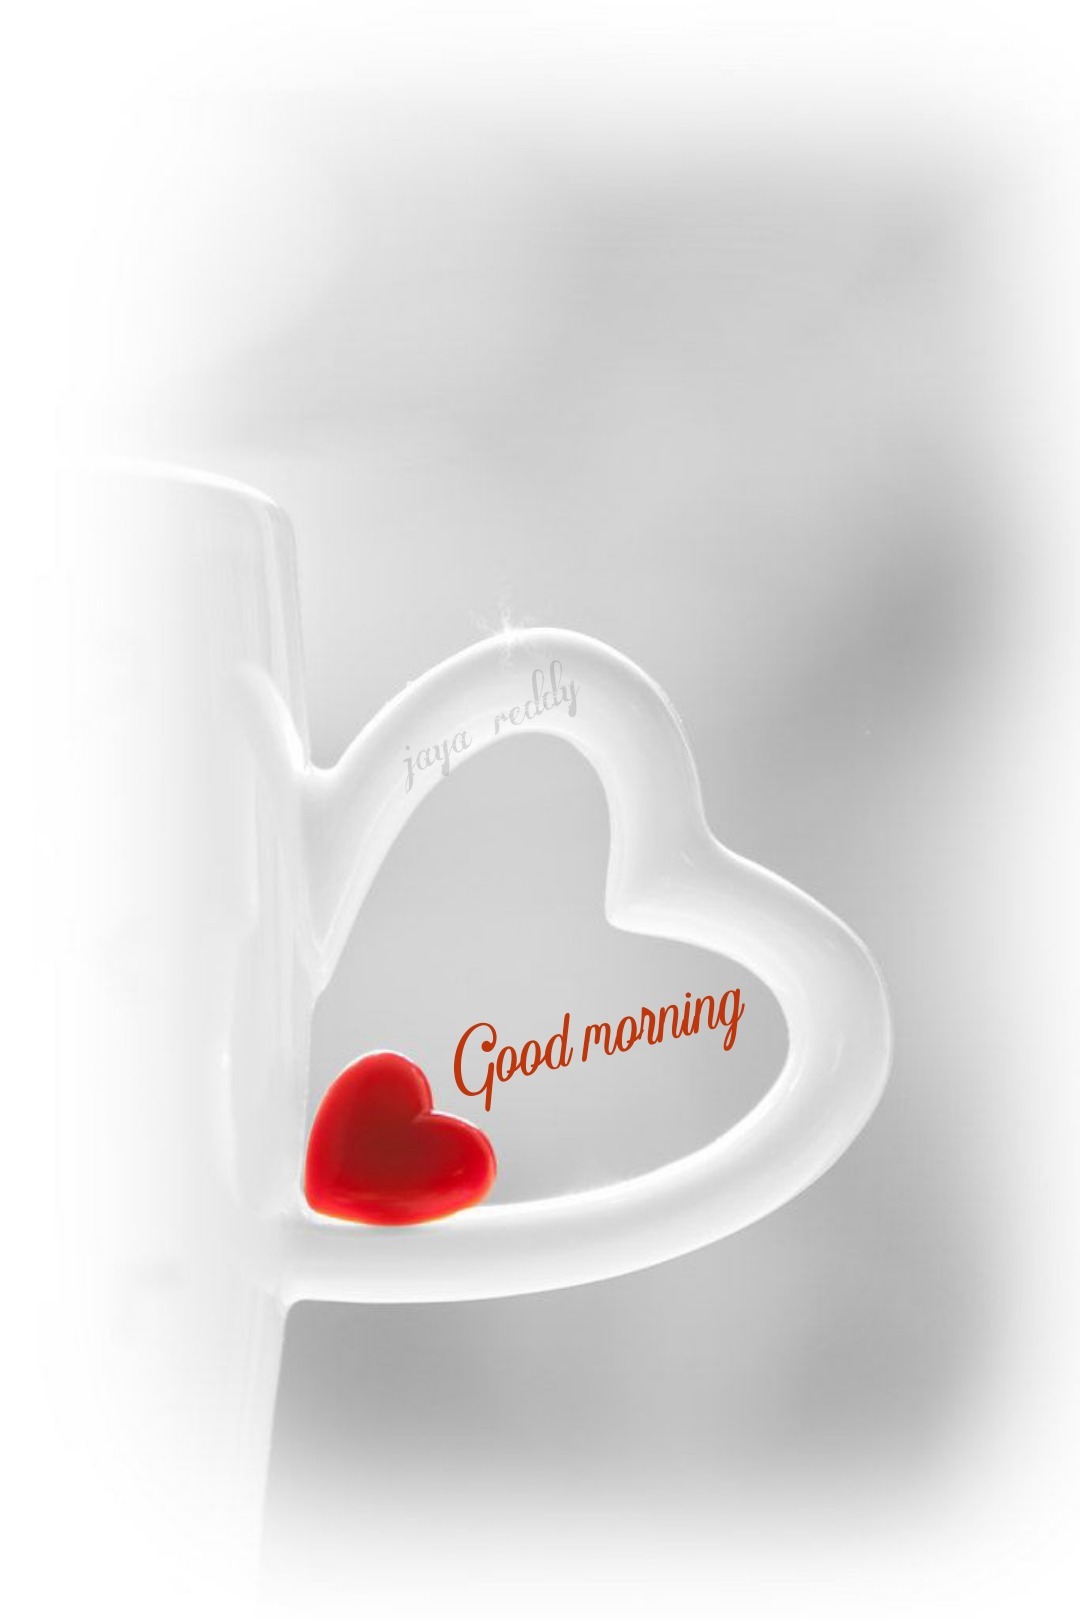 Good Morning With Heart - DesiComments.com